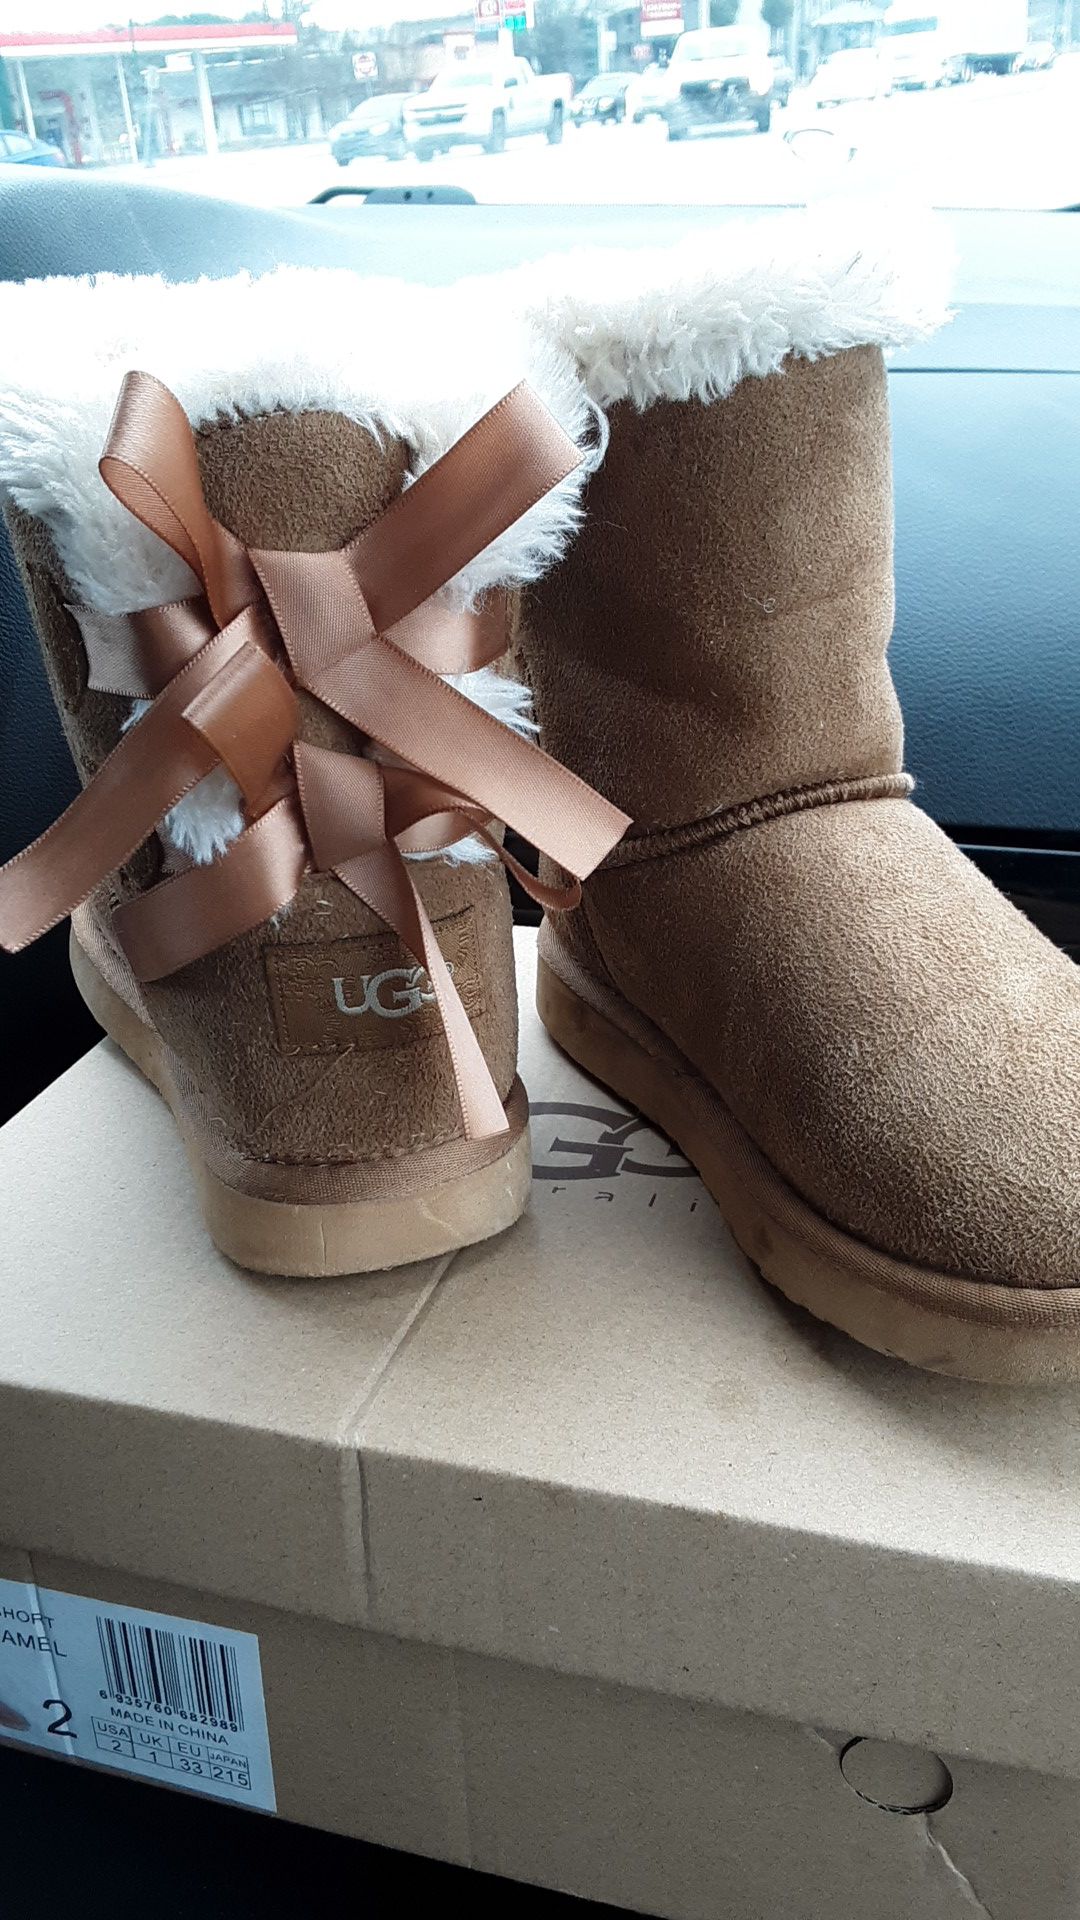 Size 2 girls Ugg boots